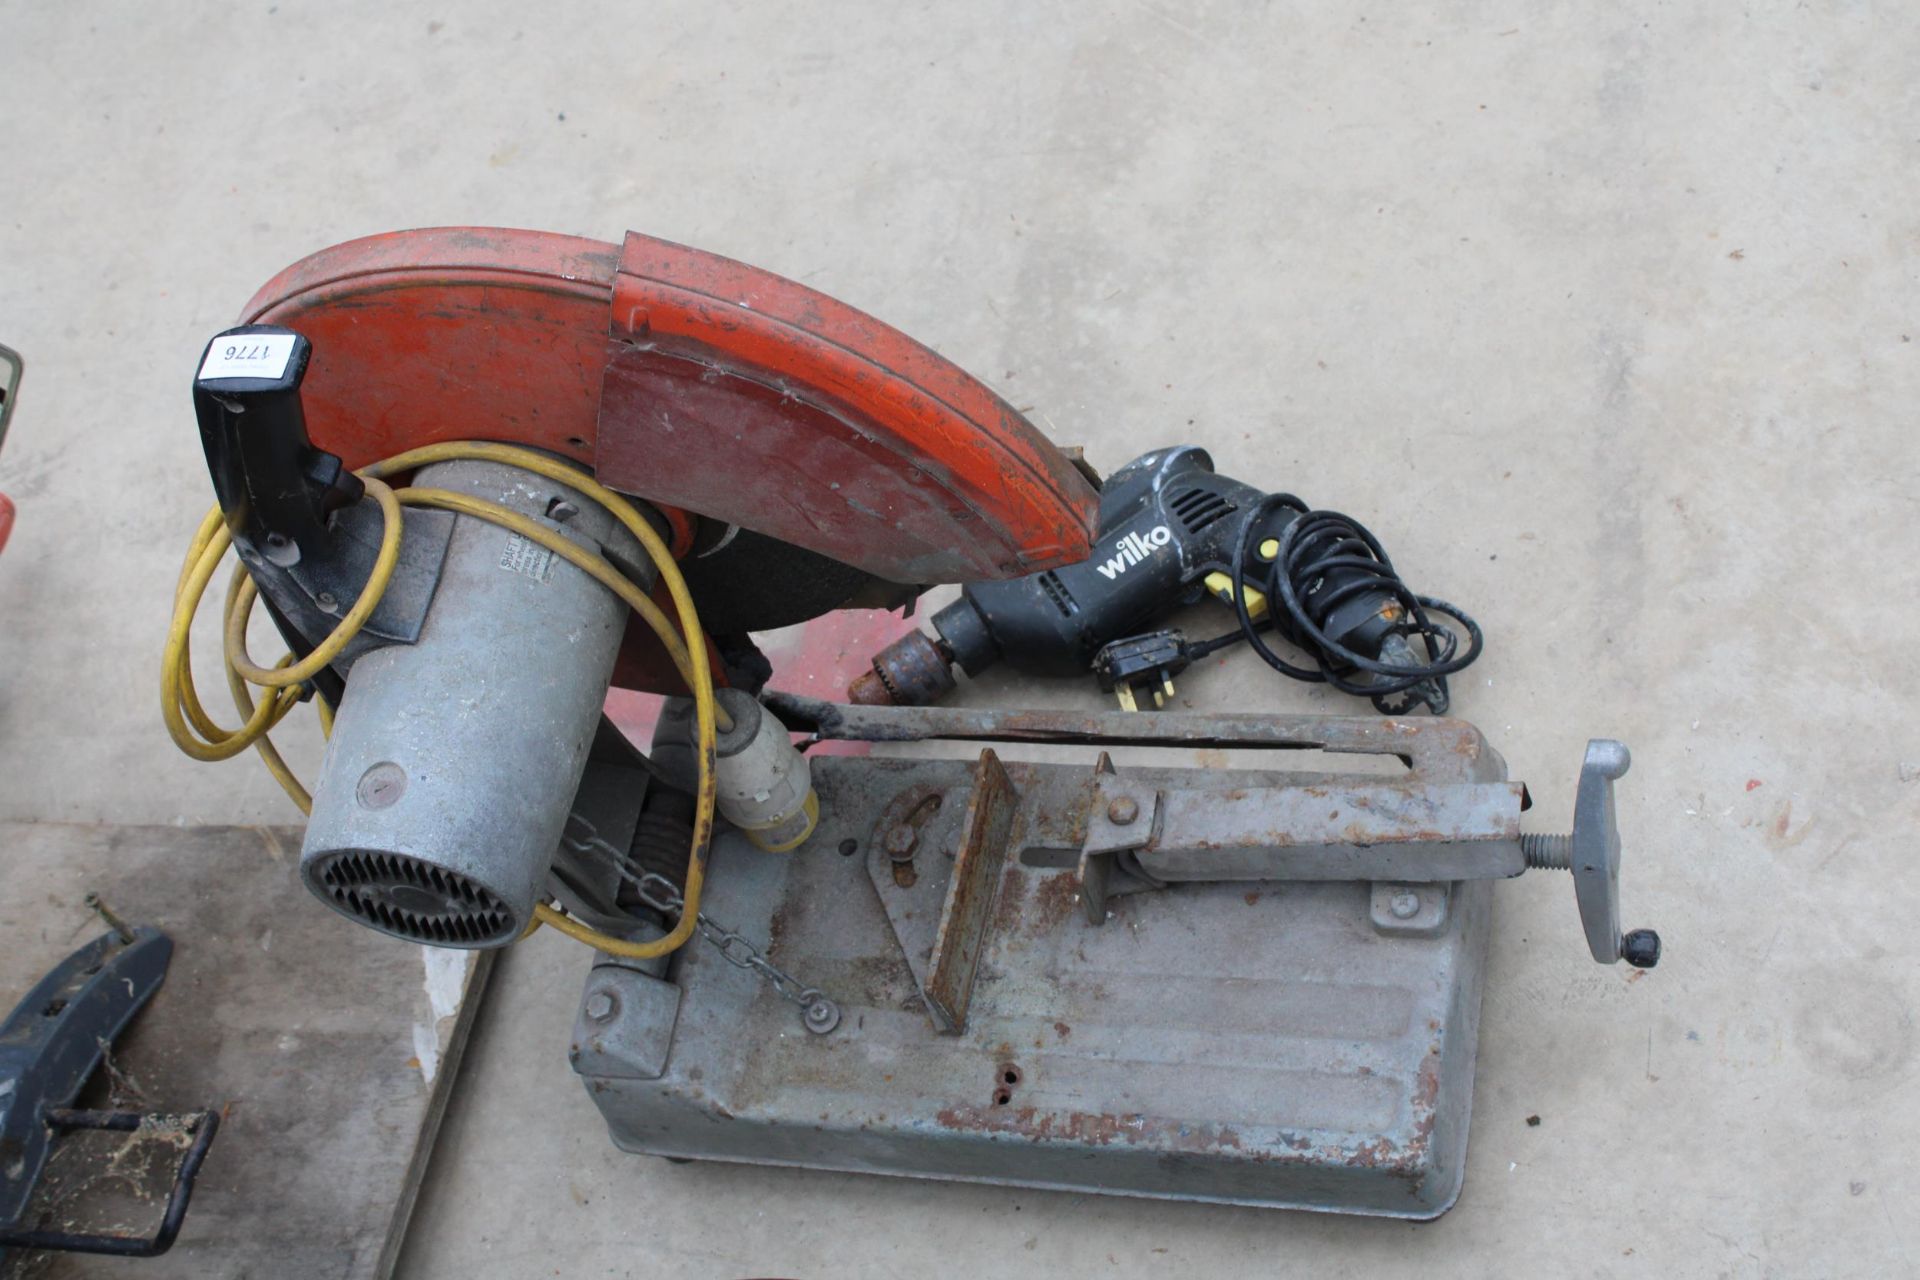 A 110V METAL CUTTING CIRCULAR SAW AND A WILKO ELECTRIC DRILL - Image 2 of 2